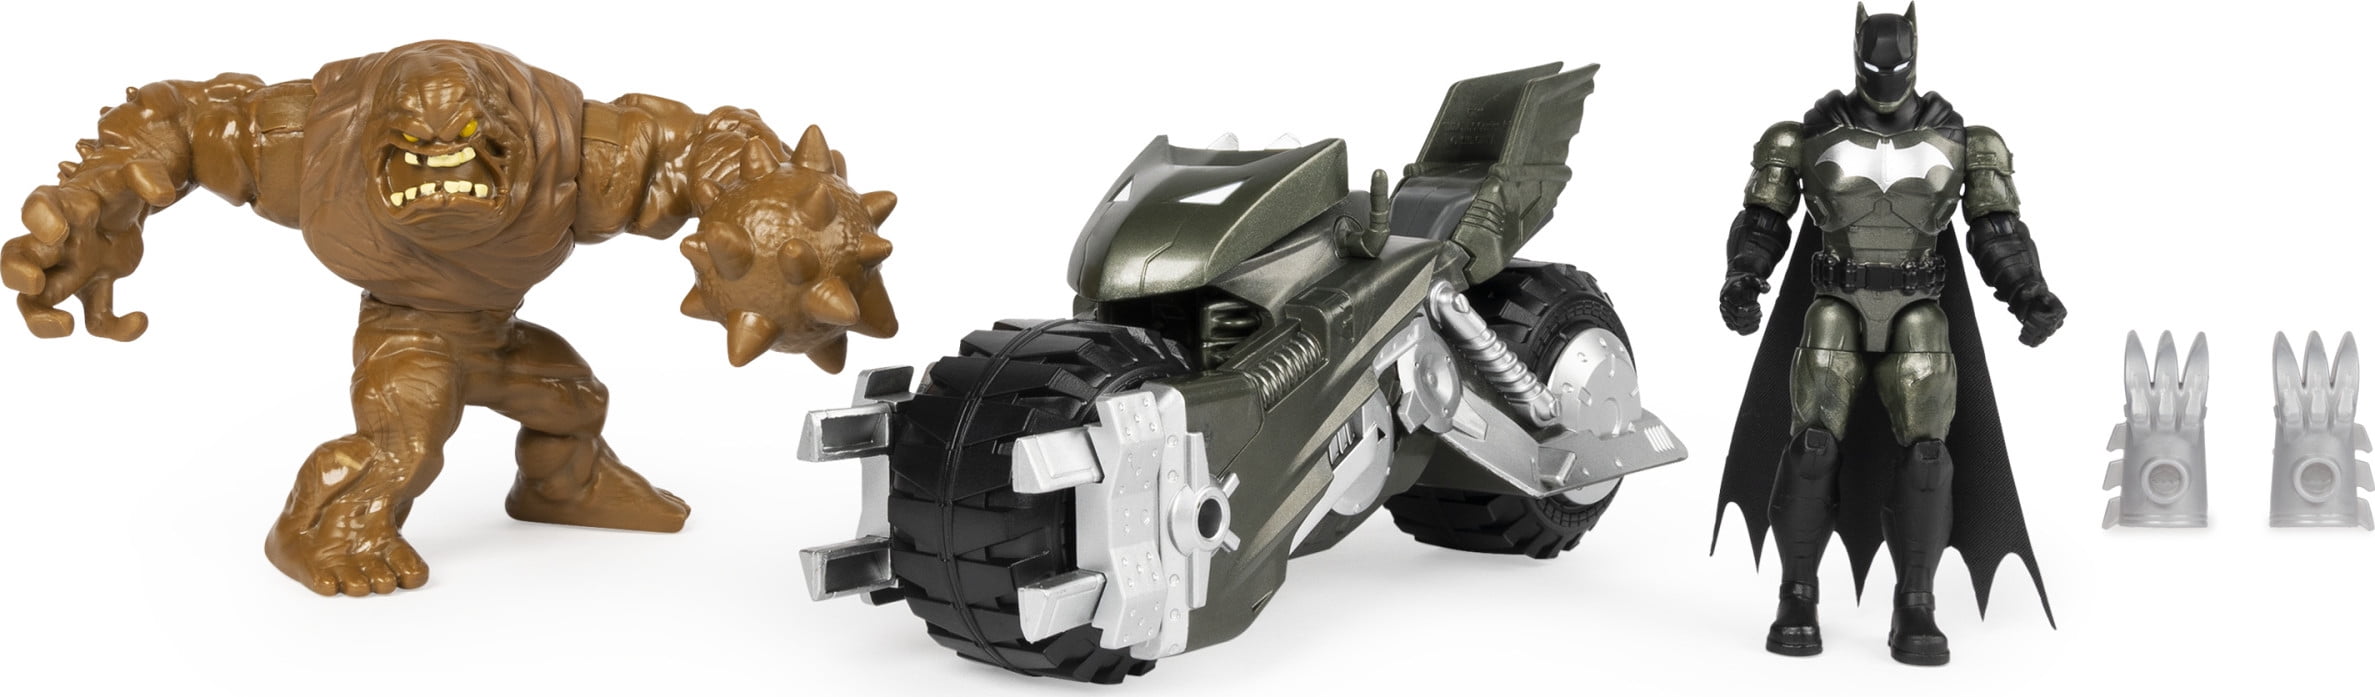 Spin Master 1st Edition DC Comics Batman VS Clayface With Batcycle for sale online 